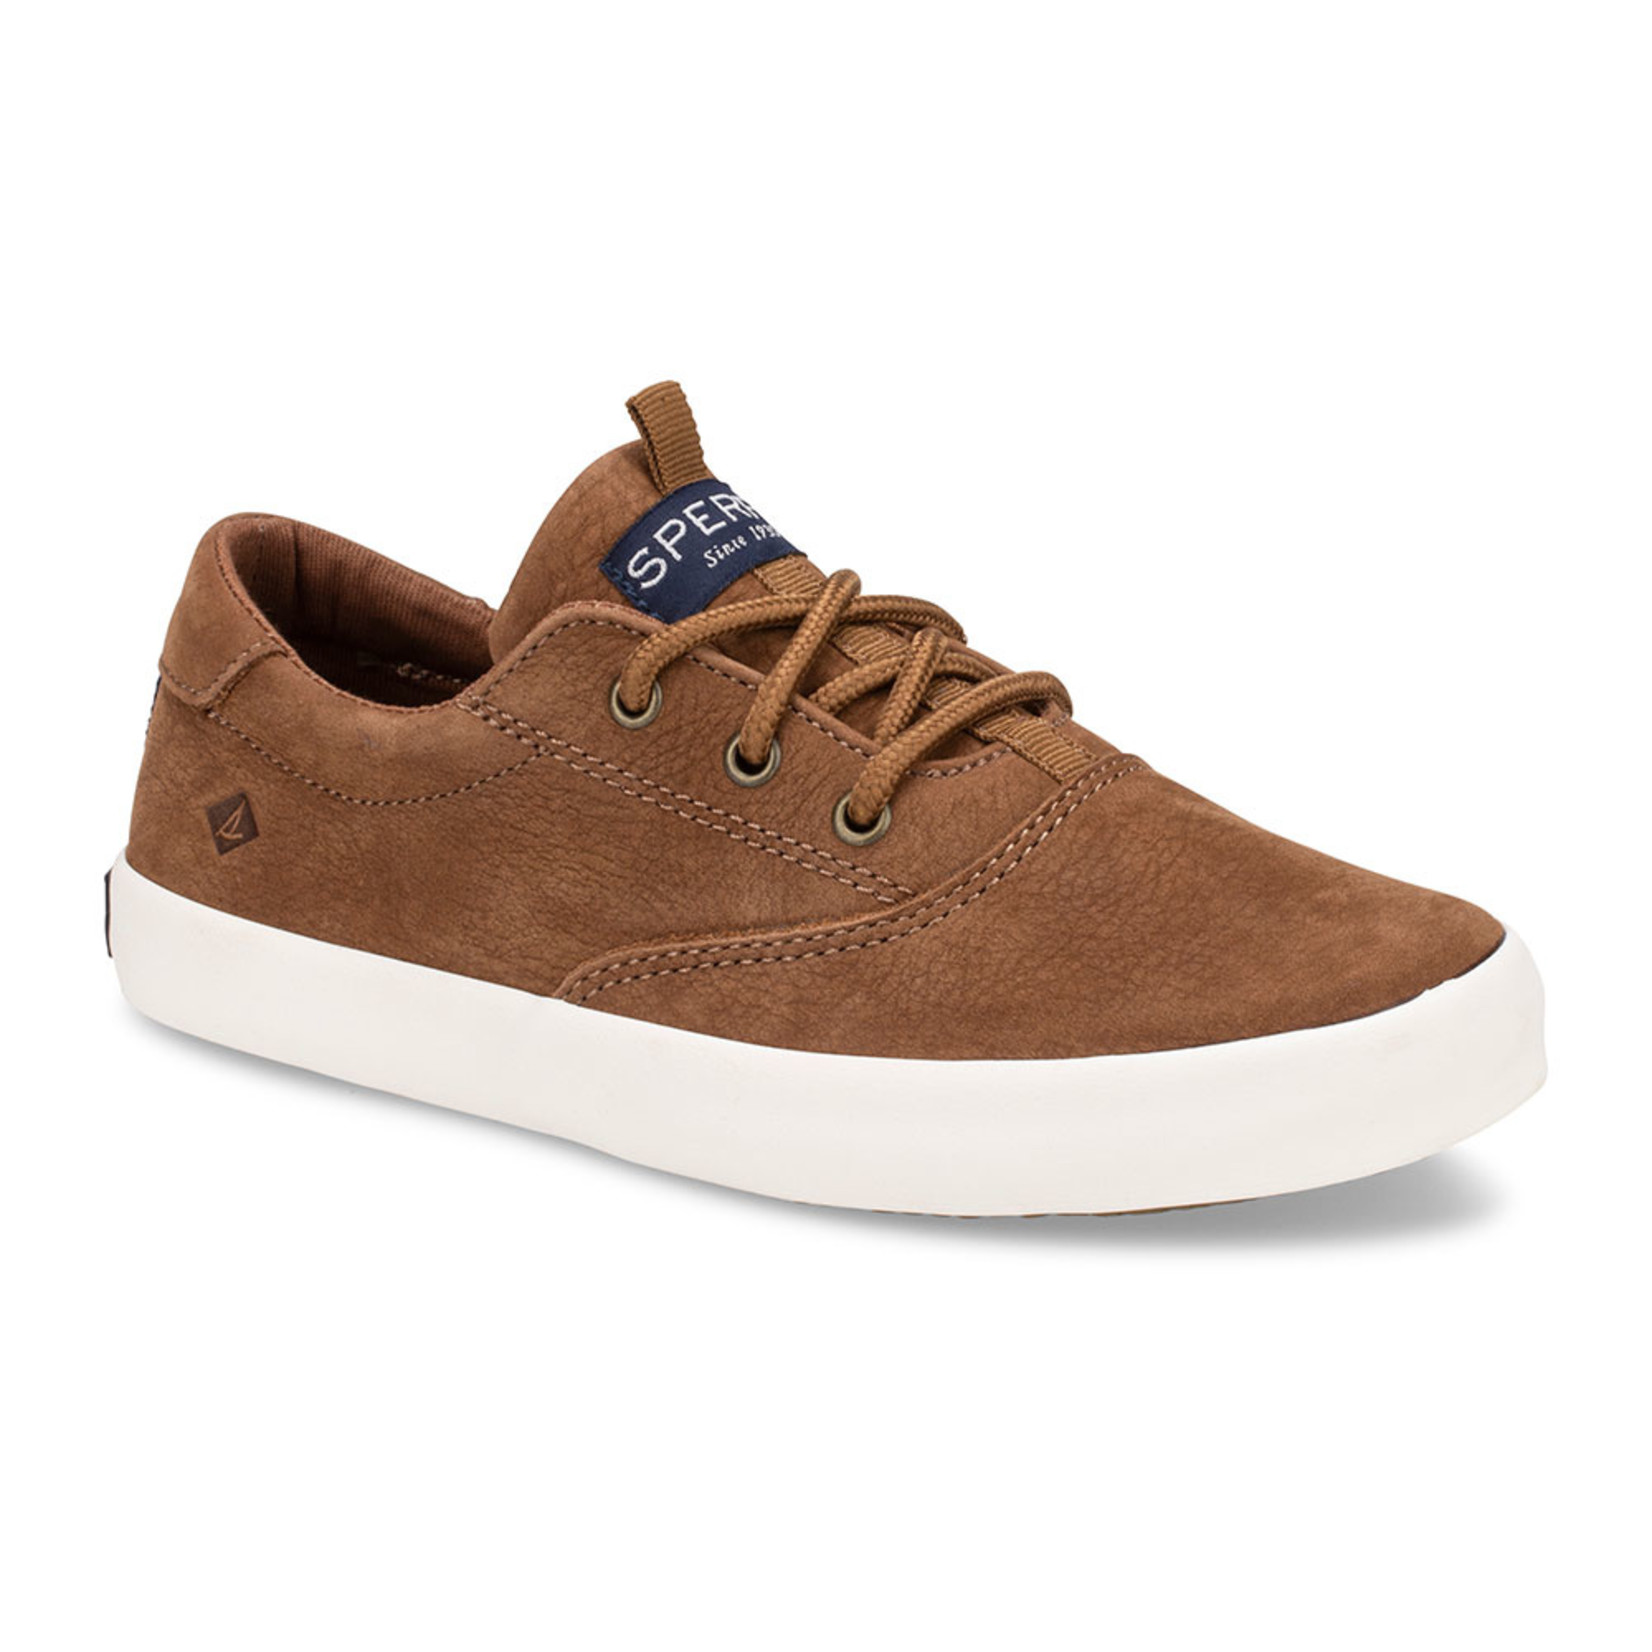 Sperry Sperry Spinnaker Washable